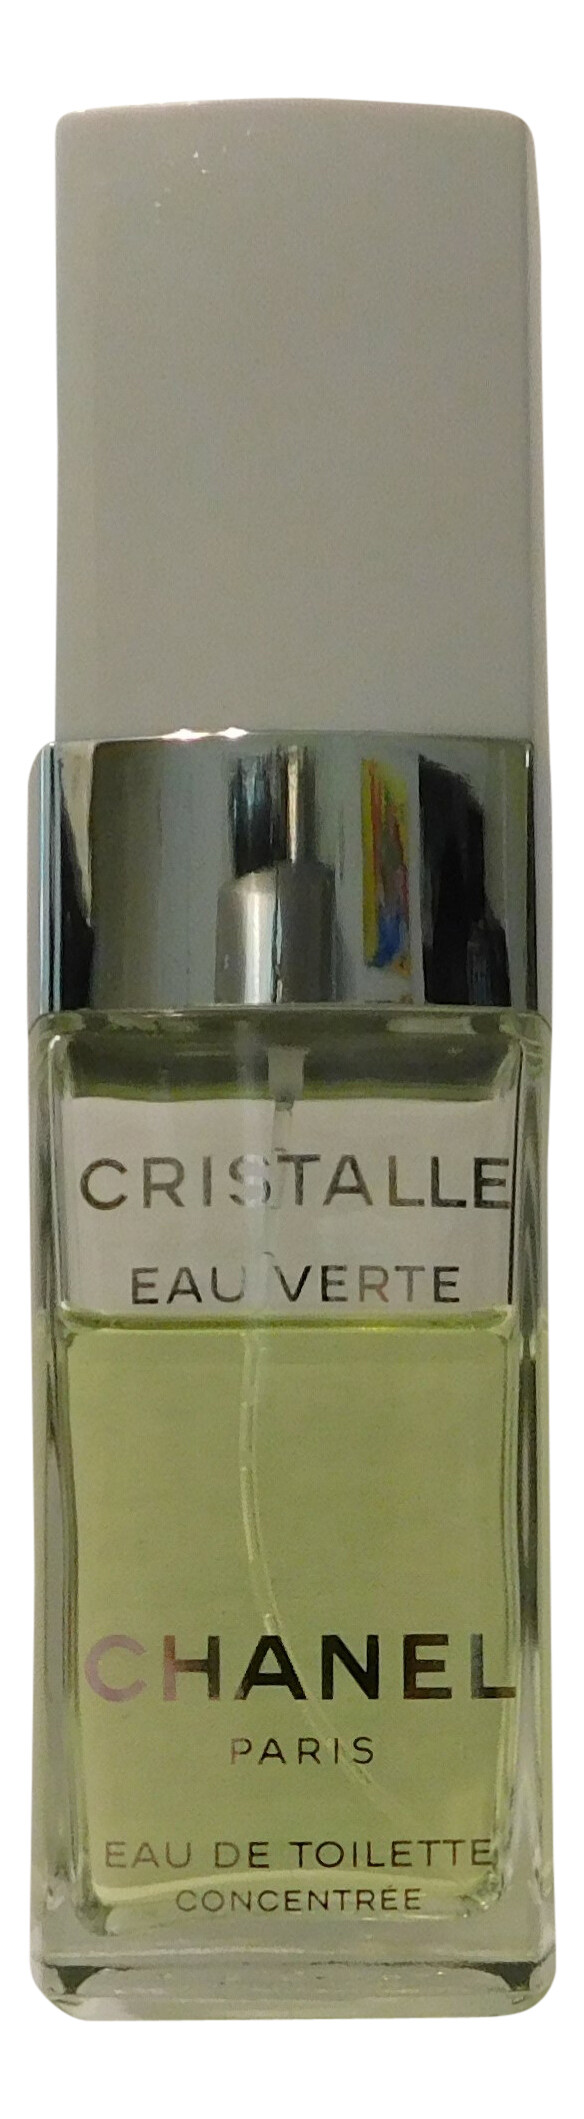 Cristalle Eau Verte by Chanel » Reviews & Perfume Facts